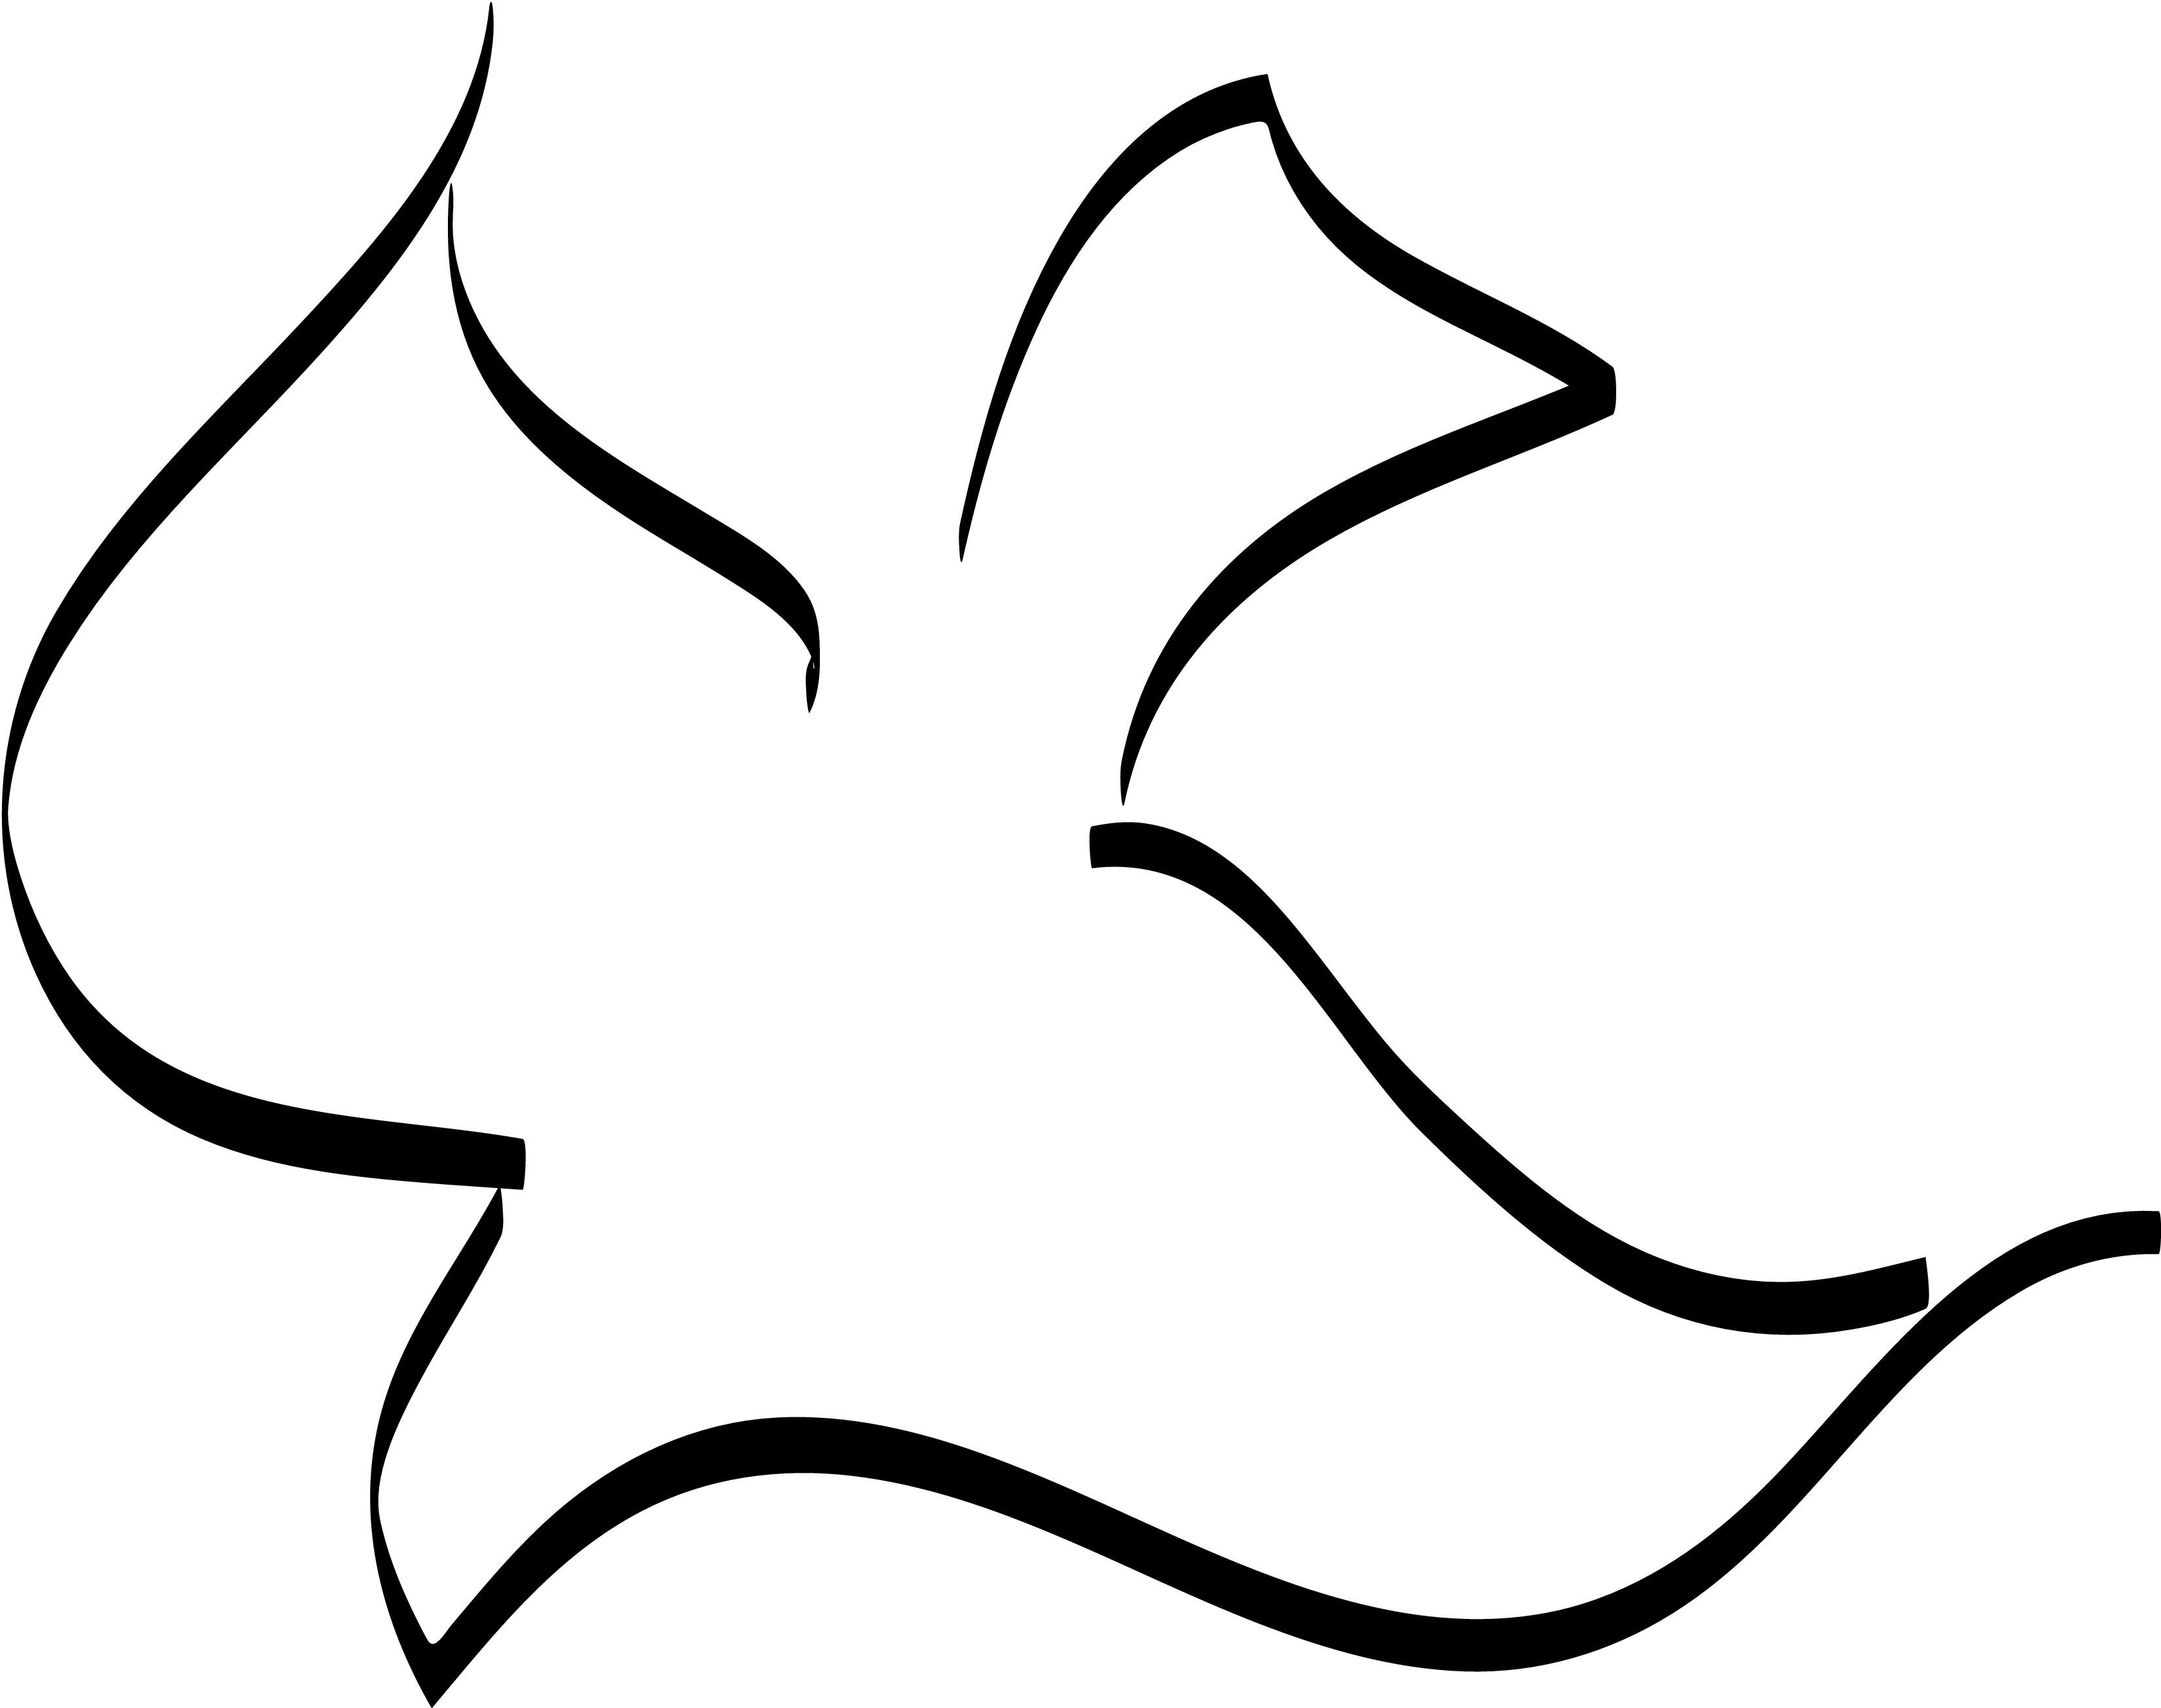 Picture Of The Holy Spirit Dove - ClipArt Best